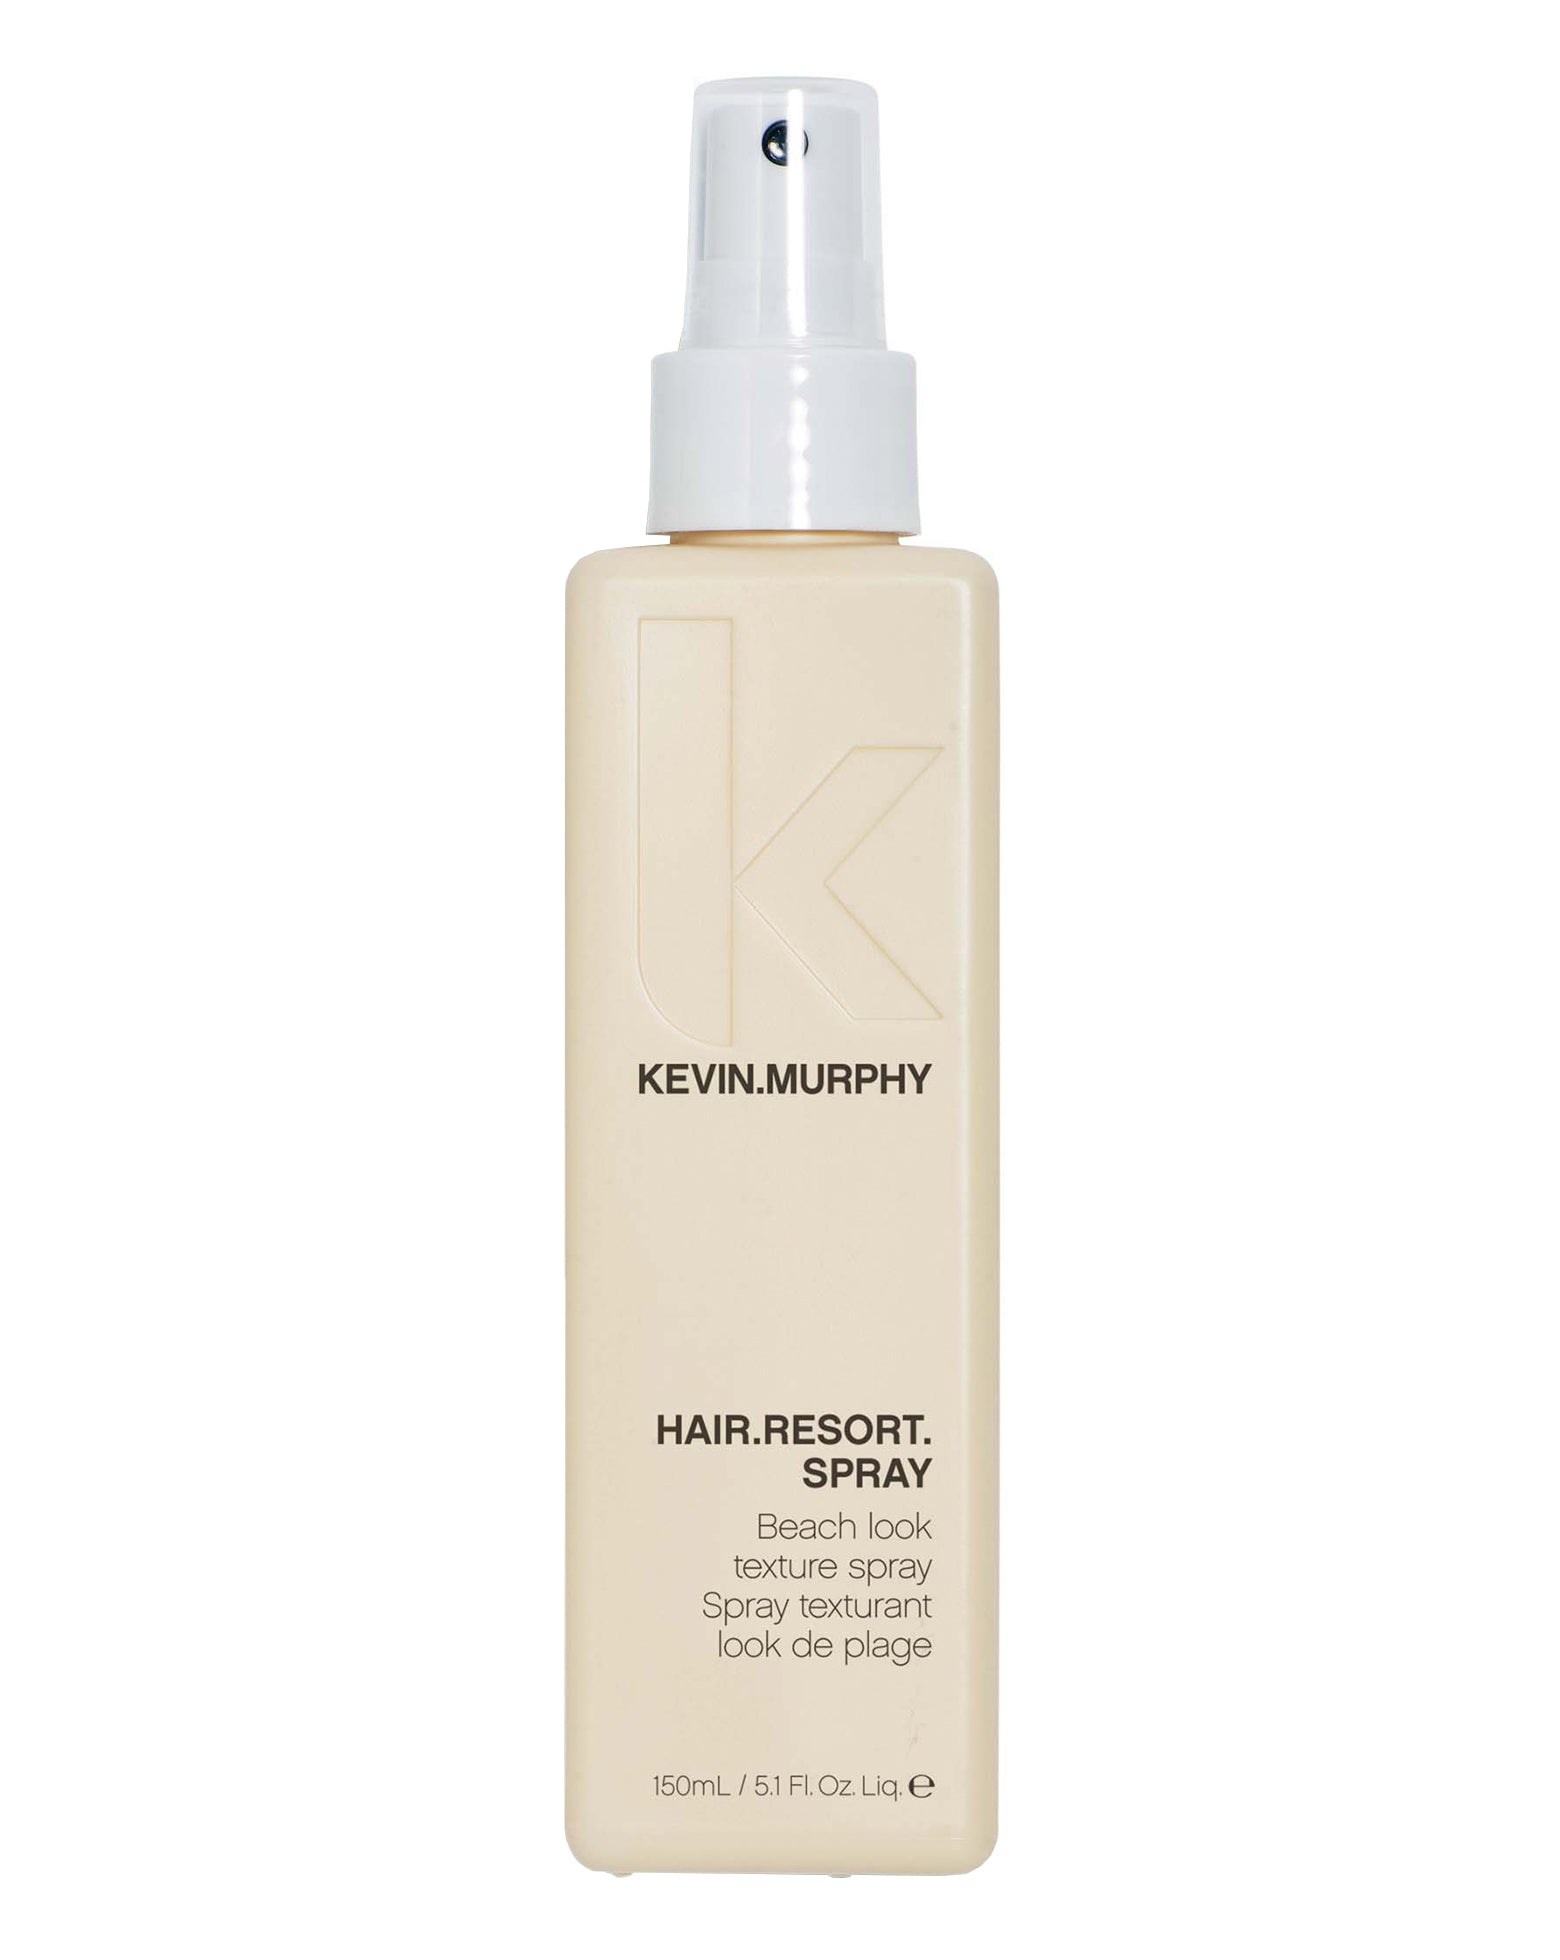 Hair Resort Spray - The Perfect Products